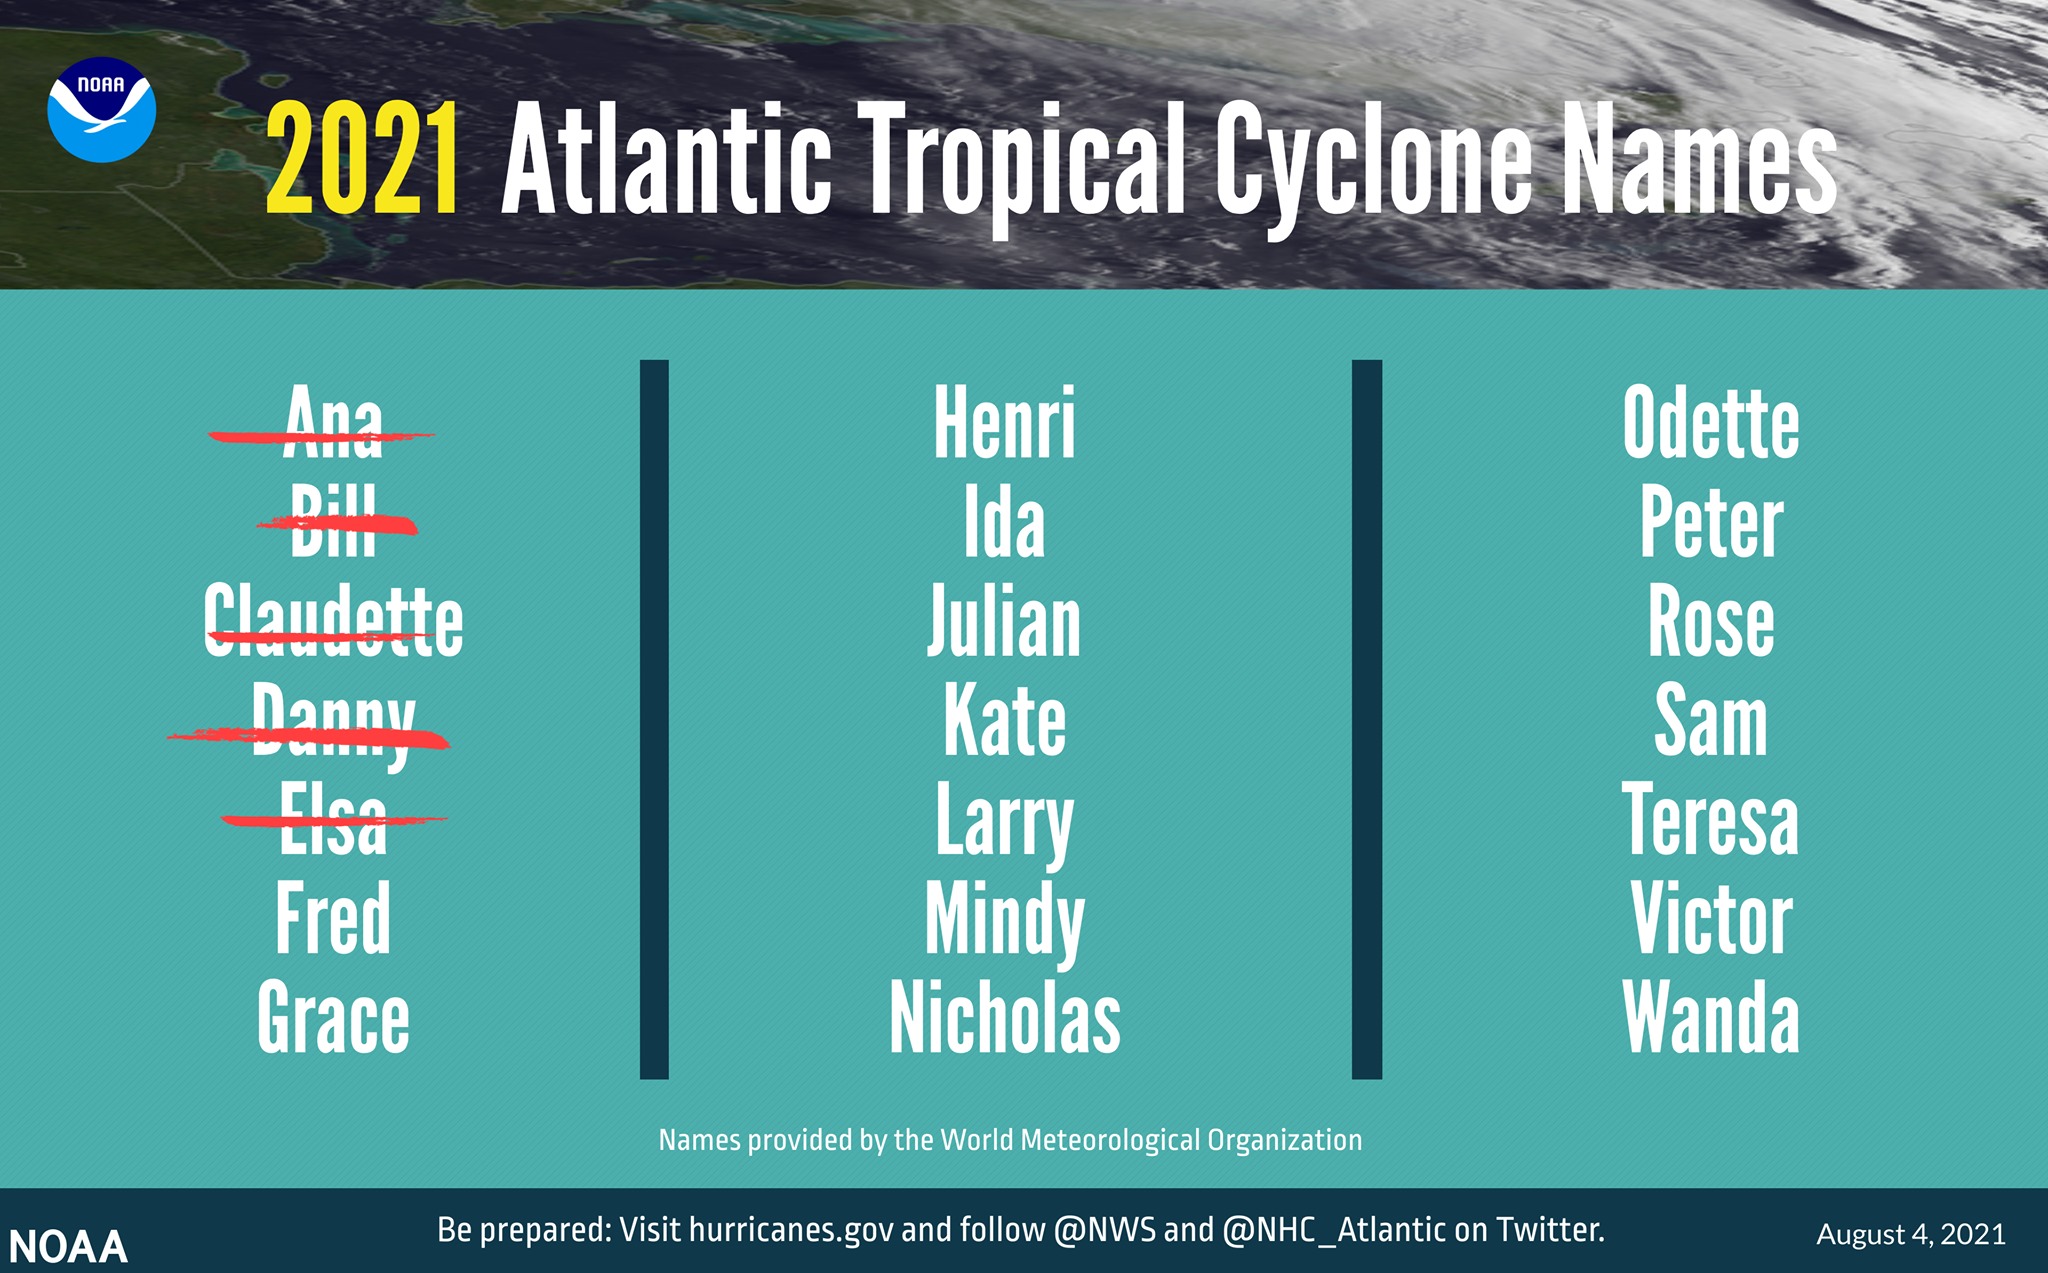 The 2021 Atlantic tropical cyclone names selected by the World Meteorological Organization. (NOAA)